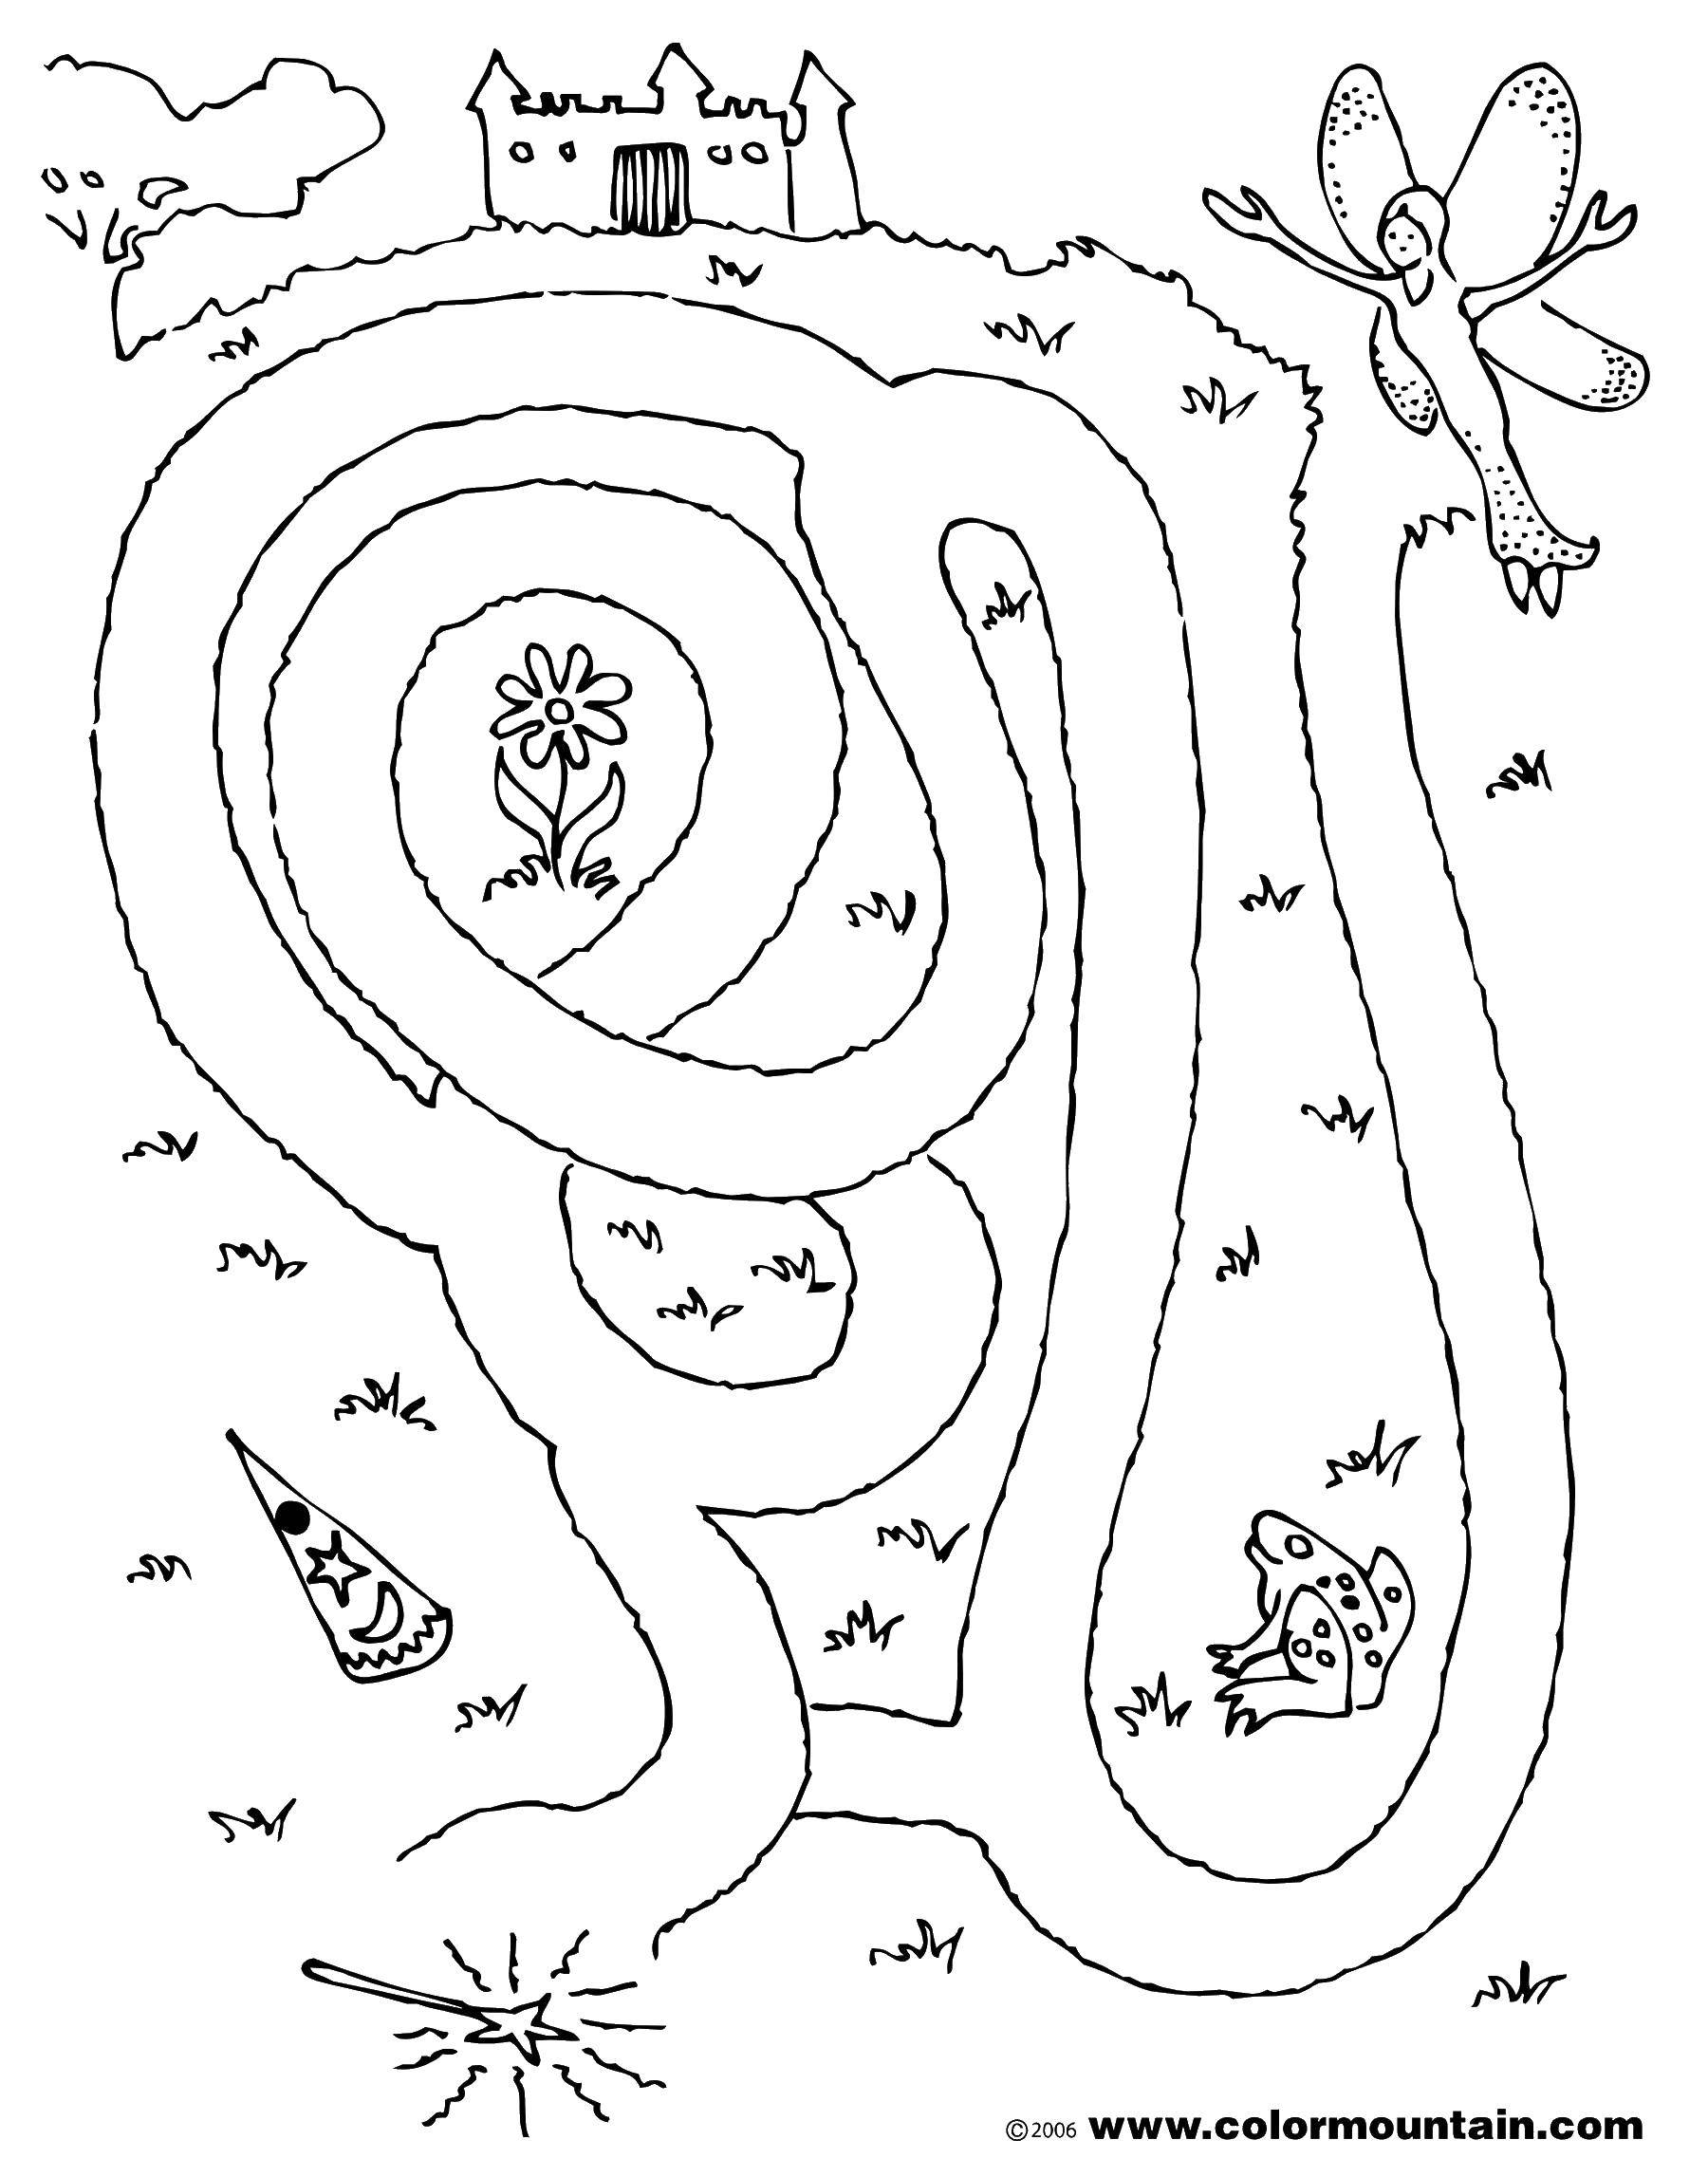 Coloring Help the fairy. Category Mazes. Tags:  Maze, logic.